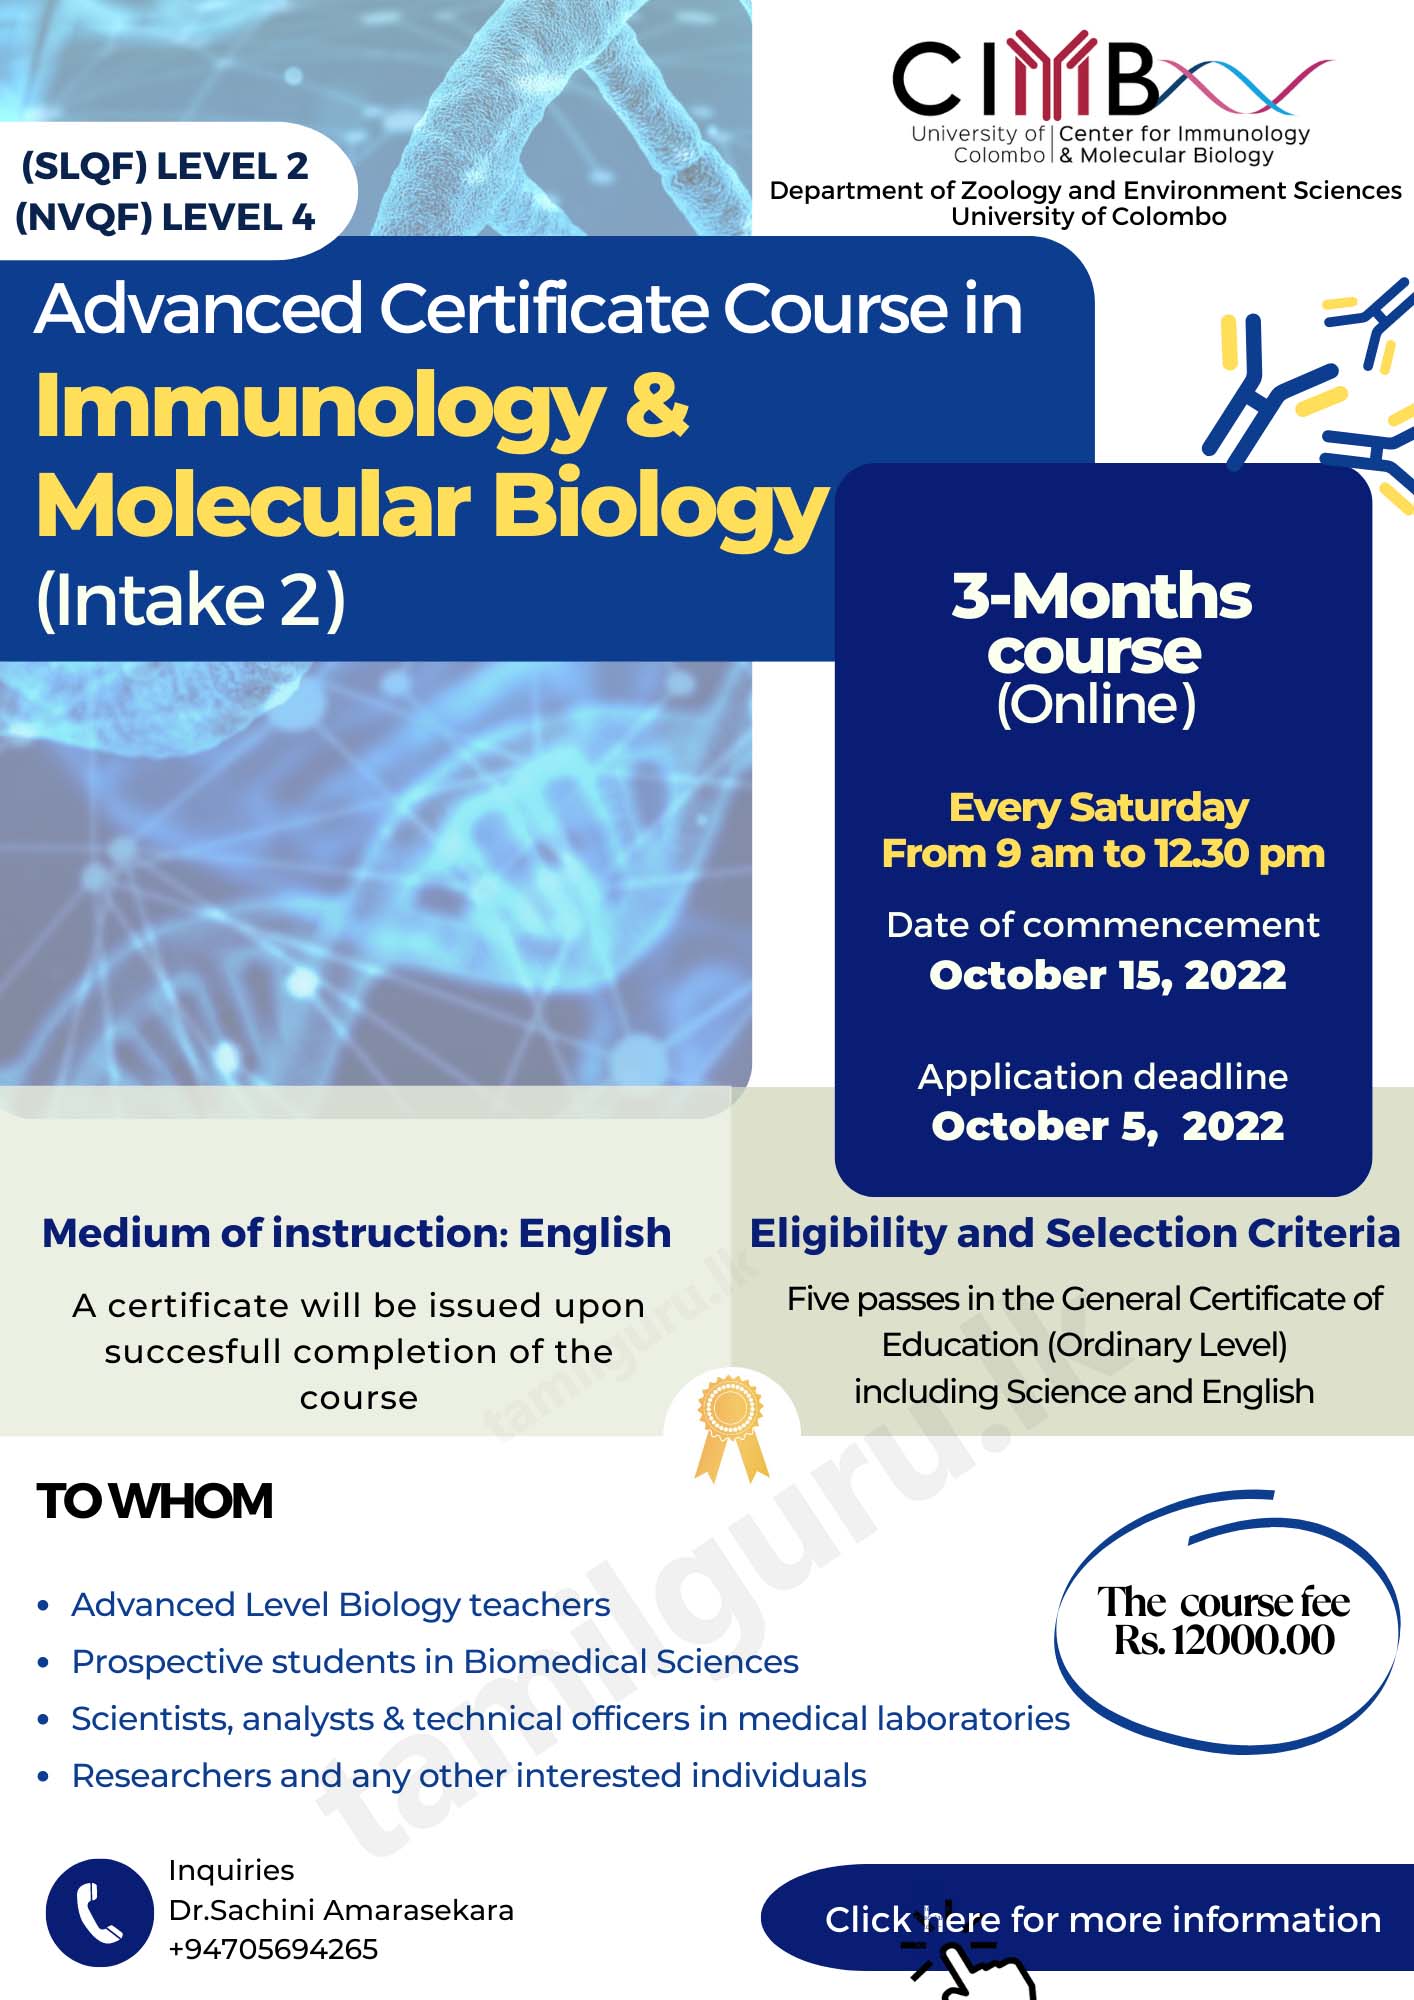 Advanced Certificate Course in Immunology & Molecular Biology (2022) - University of Colombo